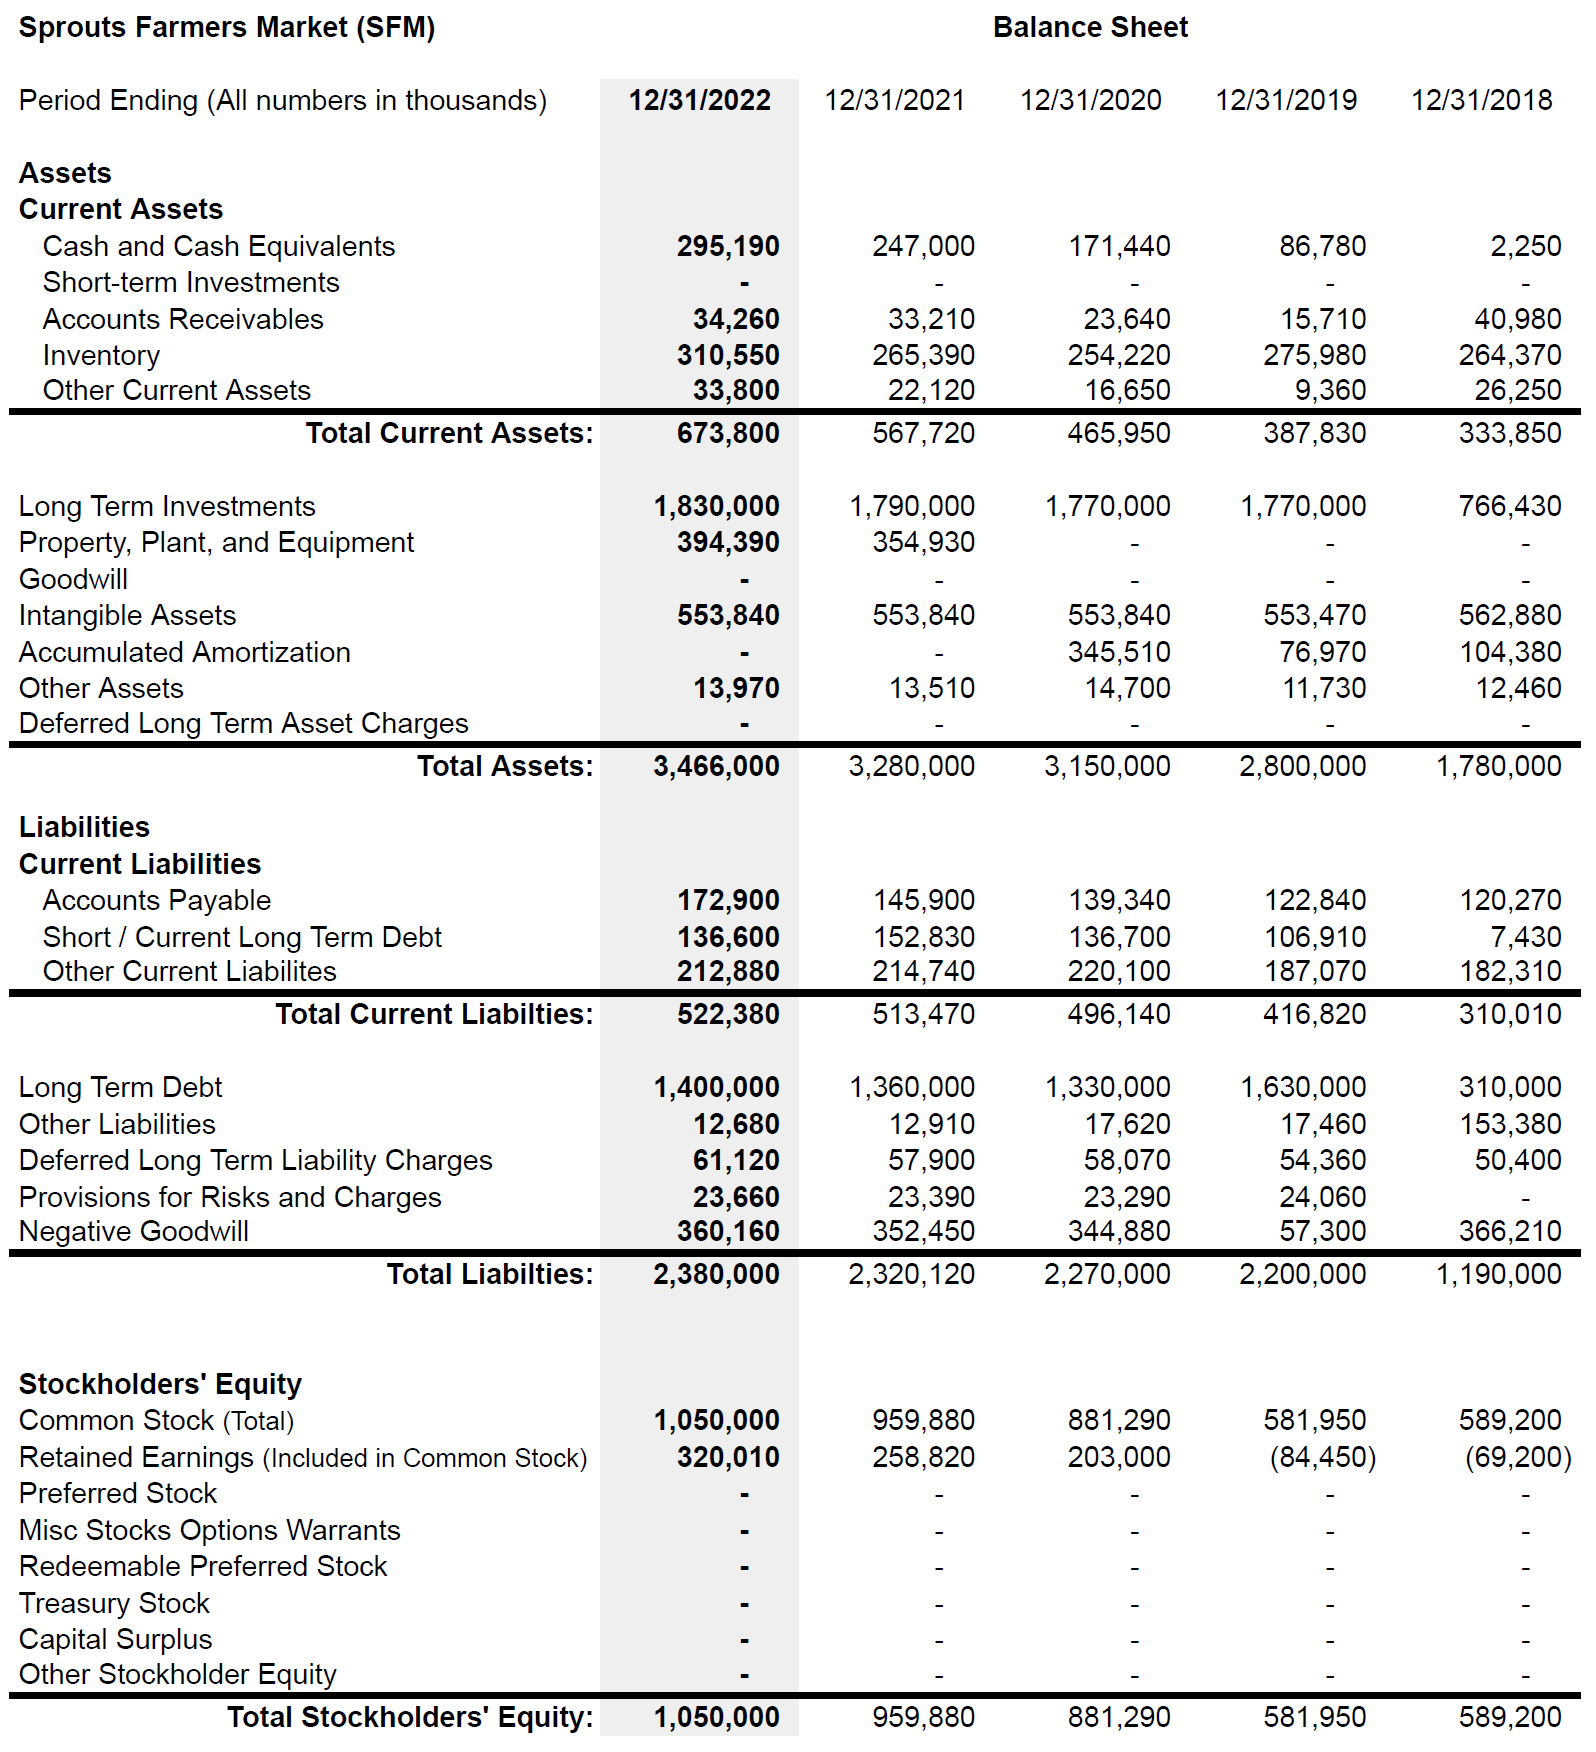 Sprouts Balance Sheet as of December 31, 2022